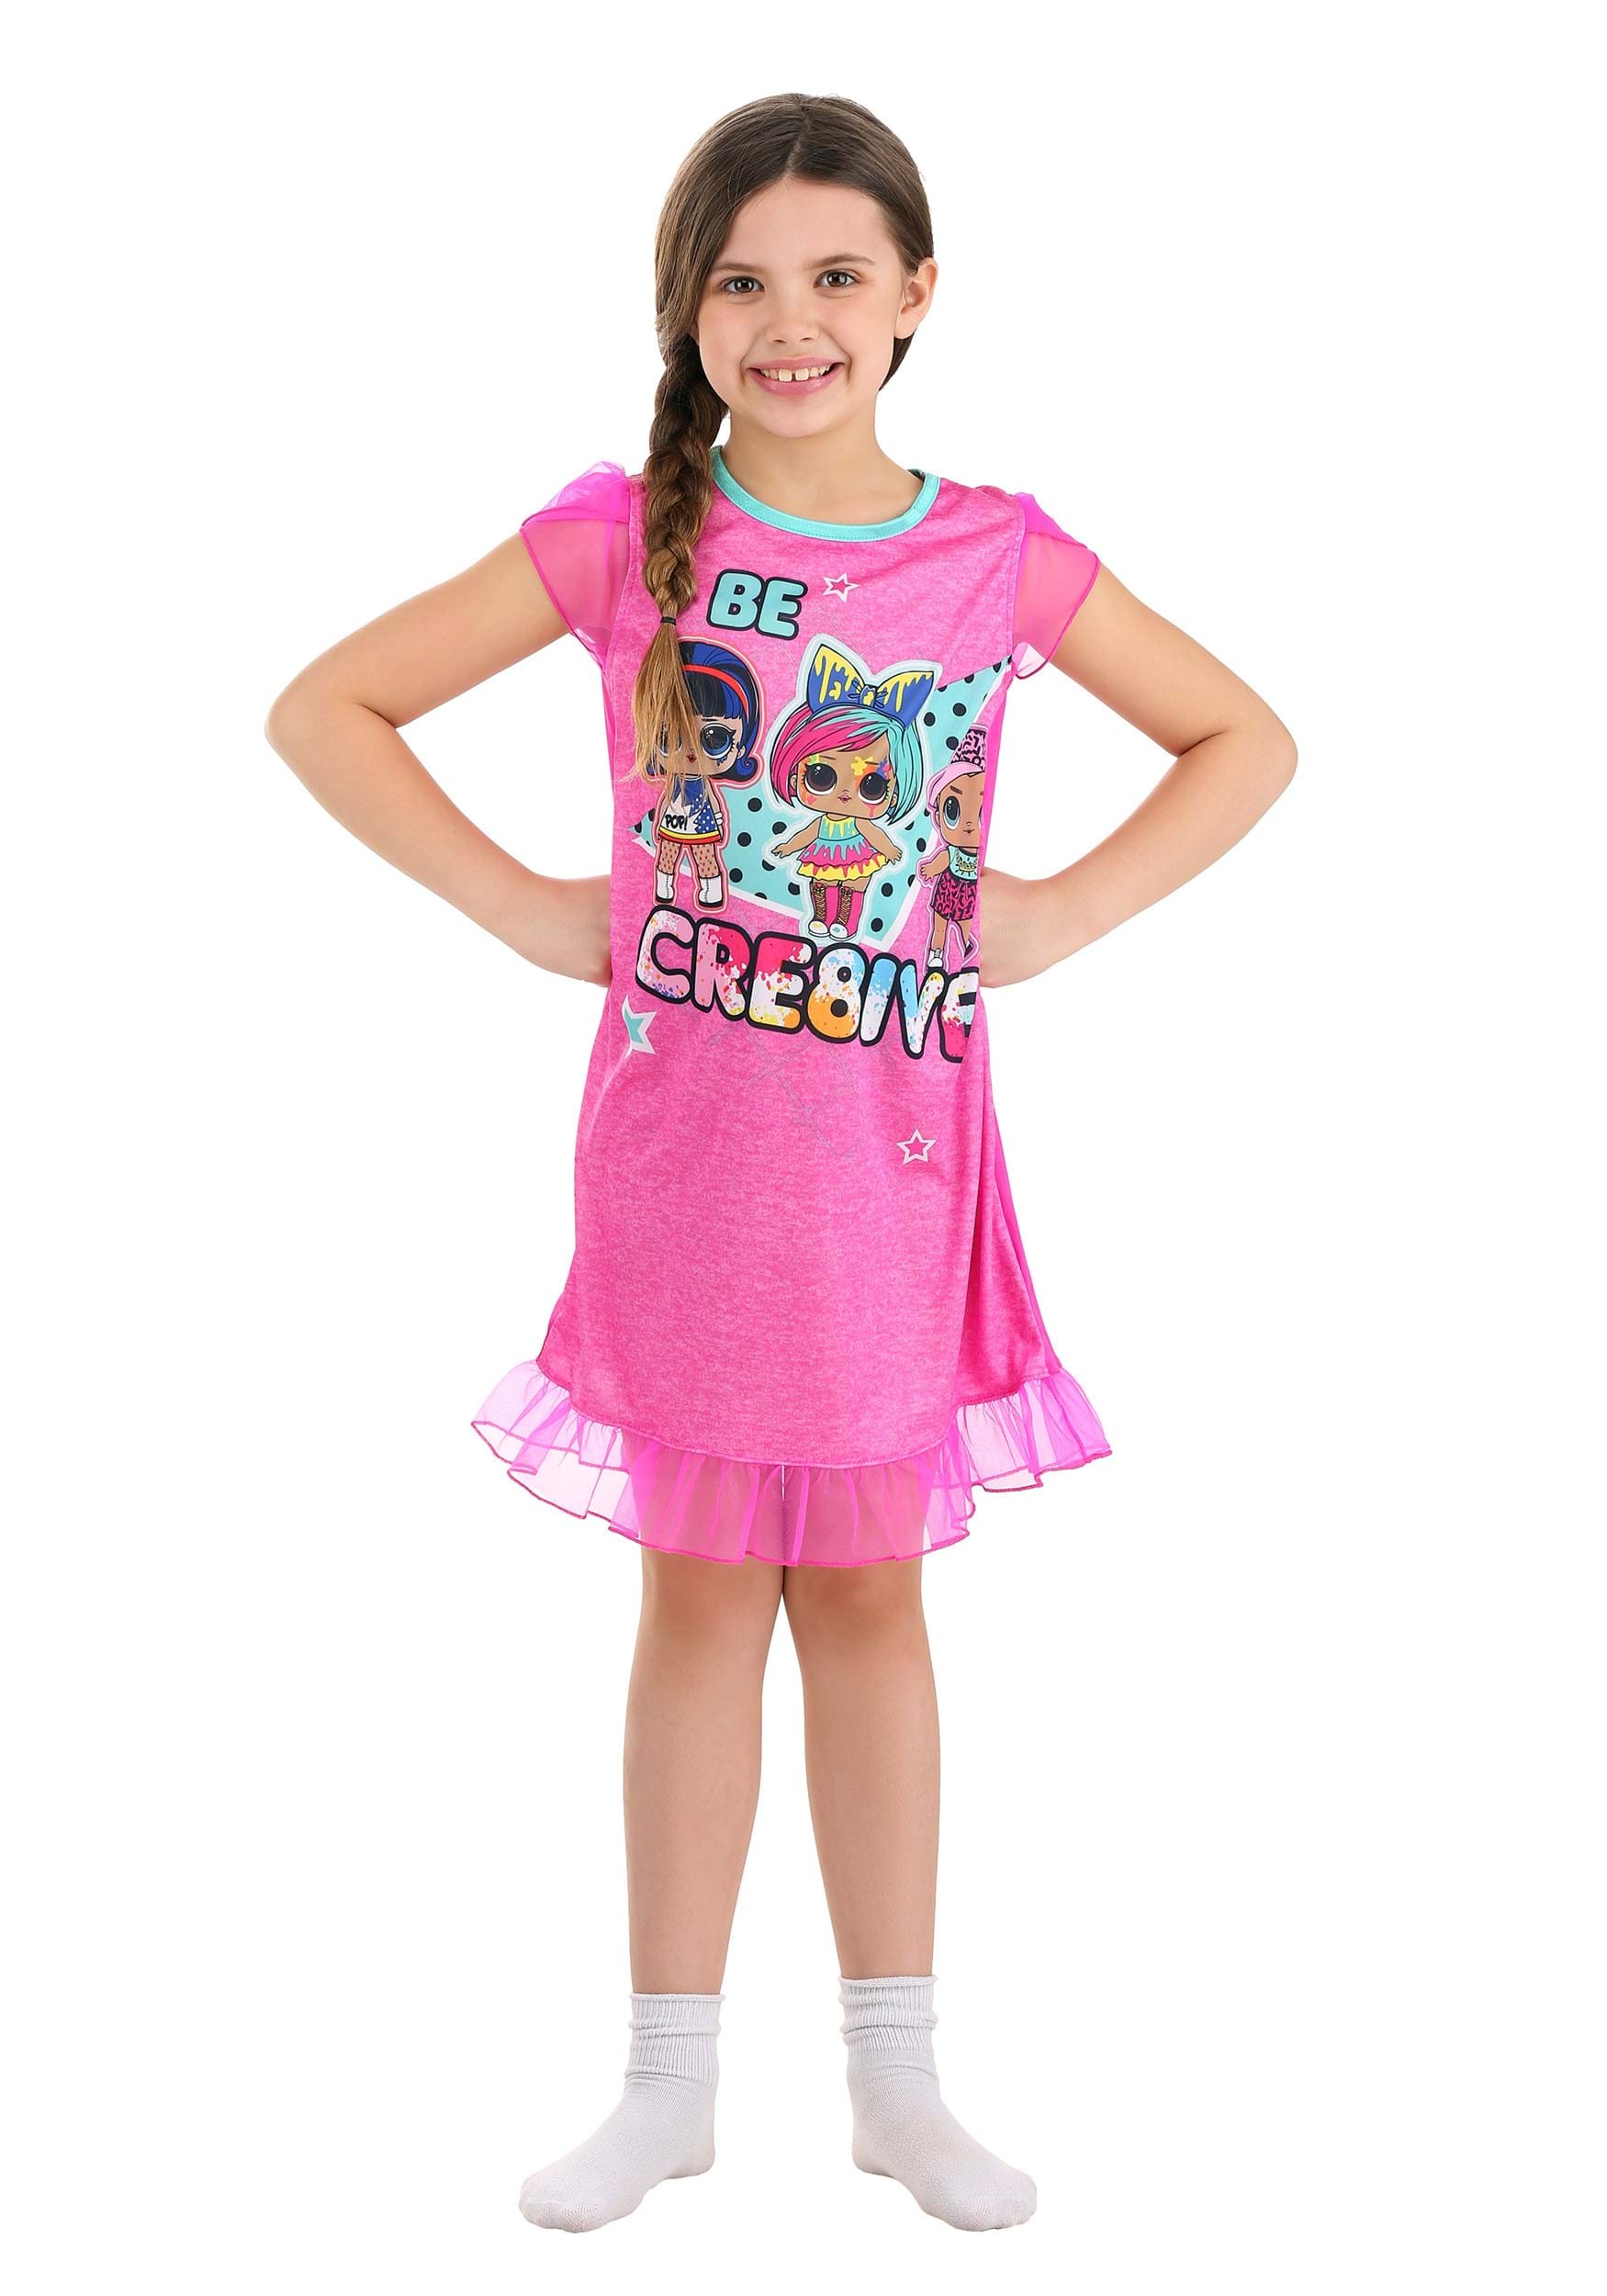 LOL Surprise Be Cre8ive Girls Nightgown